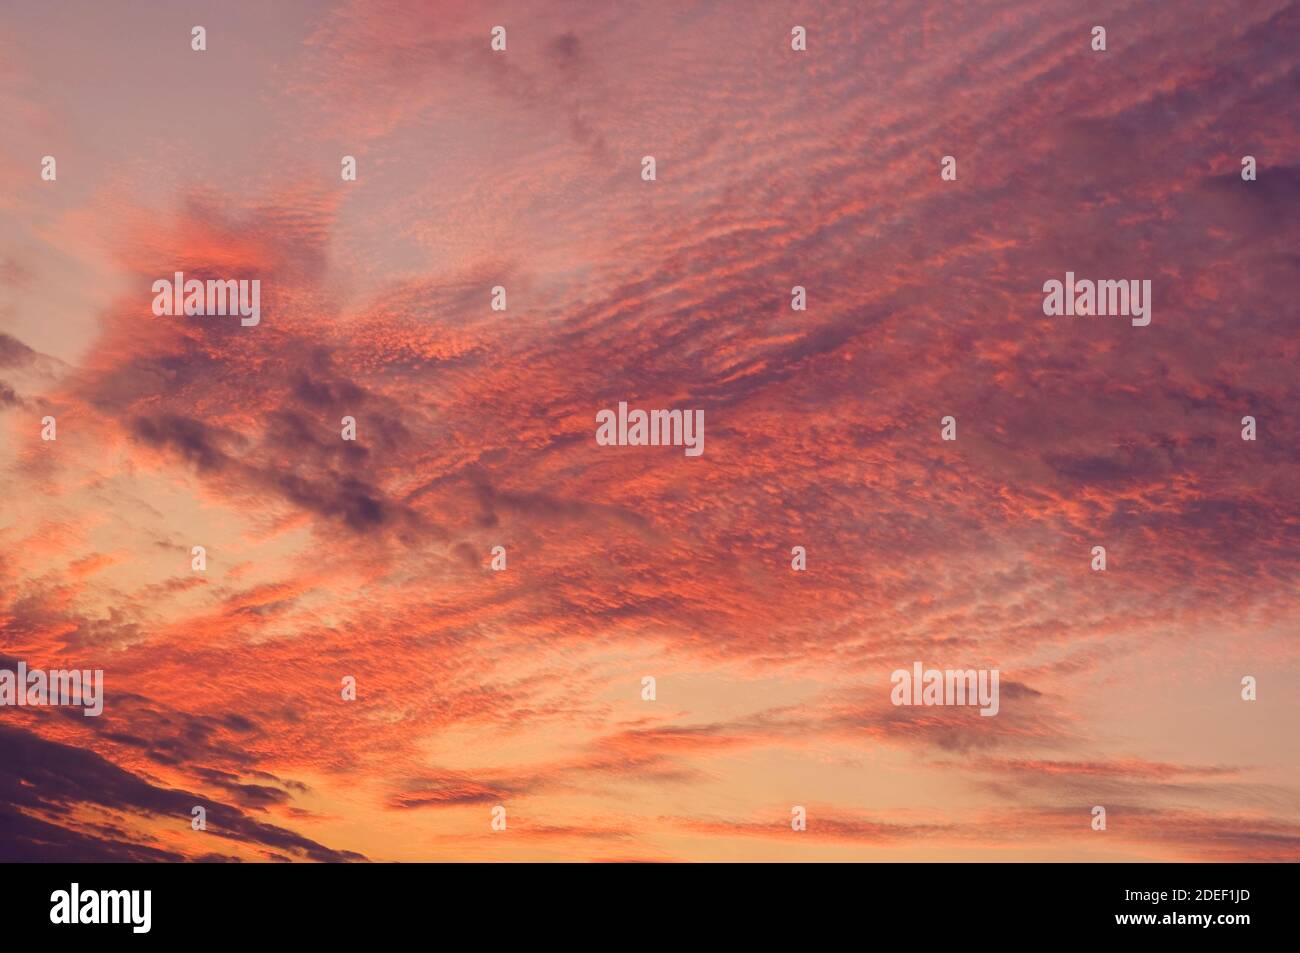 Fire sky background. Soft clouds with the hint of the sun at sunset. Many orange tones and patterns of clouds. Stock Photo